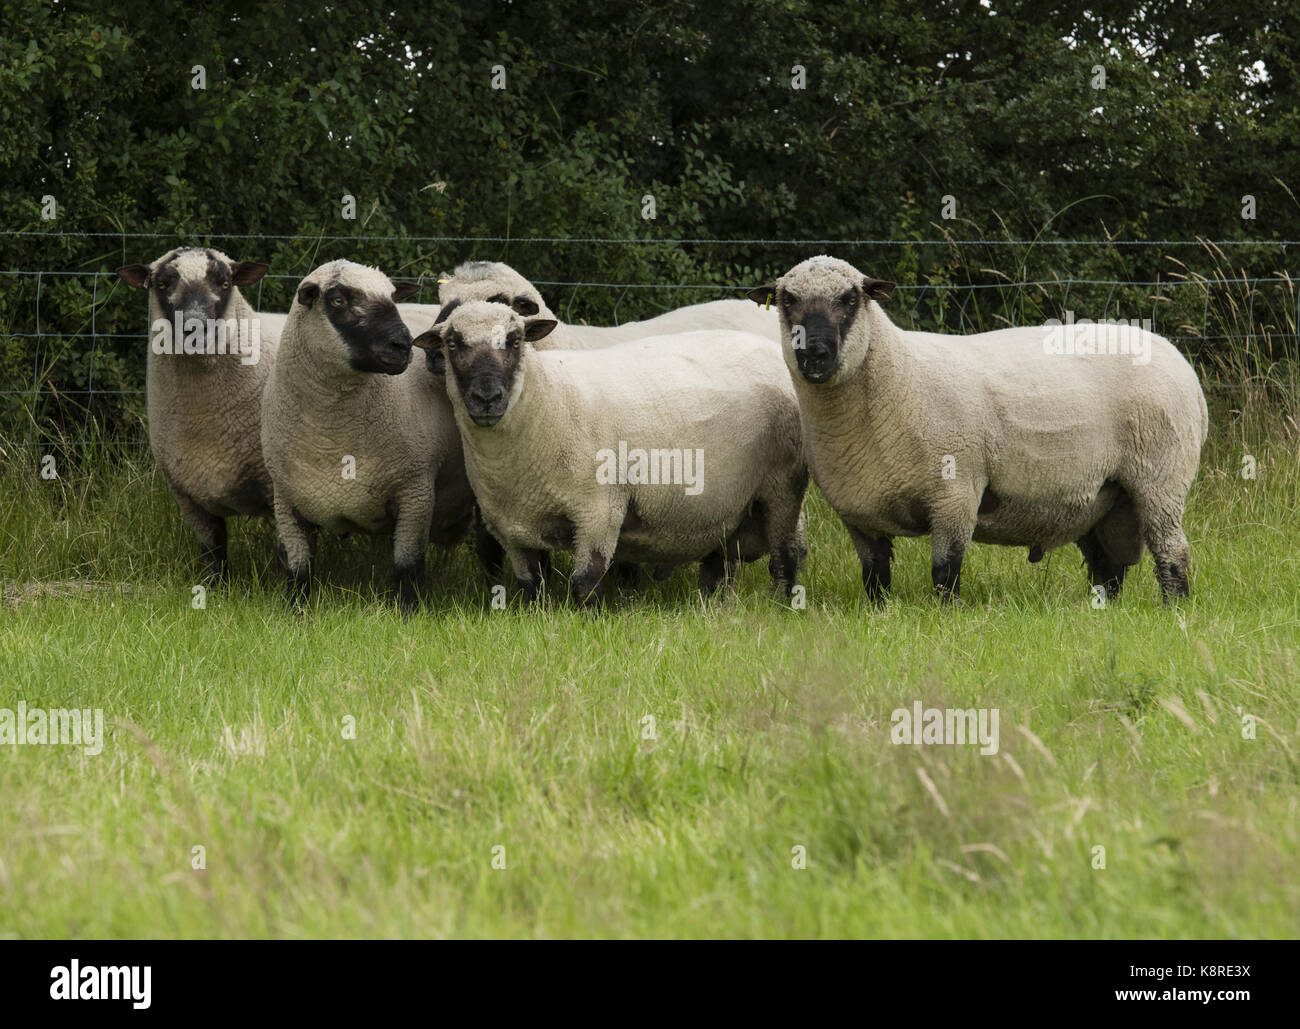 Shropshire rams in a field near Chester, Cheshire. Stock Photo